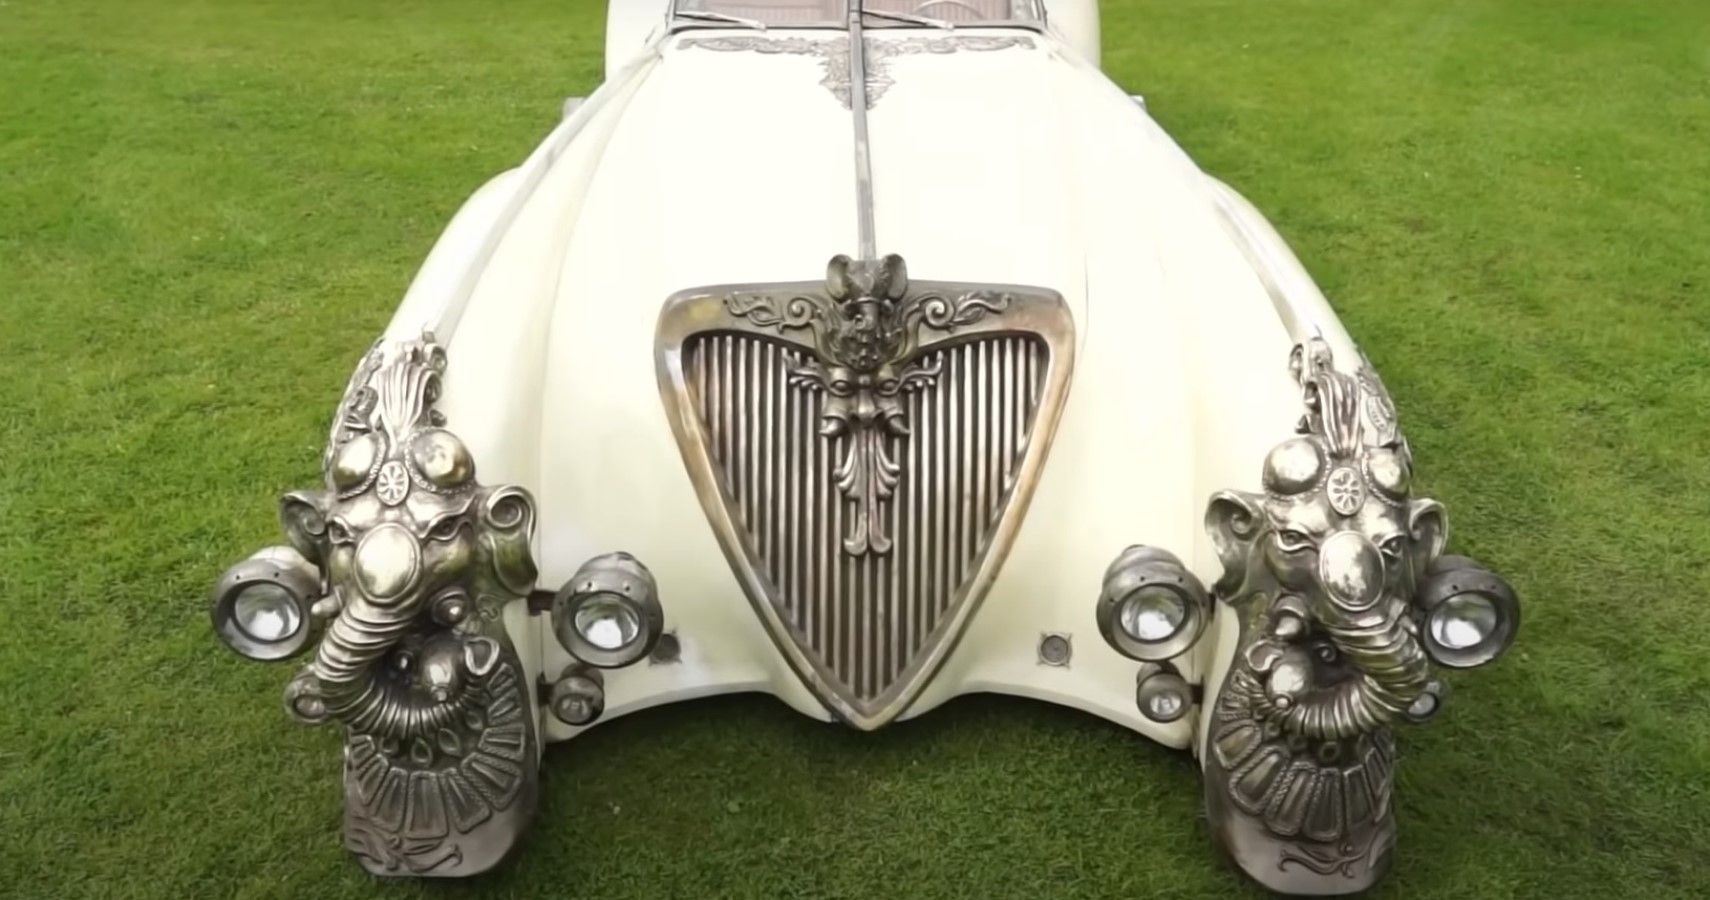 Nautilus car from League of extraordinary gentlemen front ornamented view